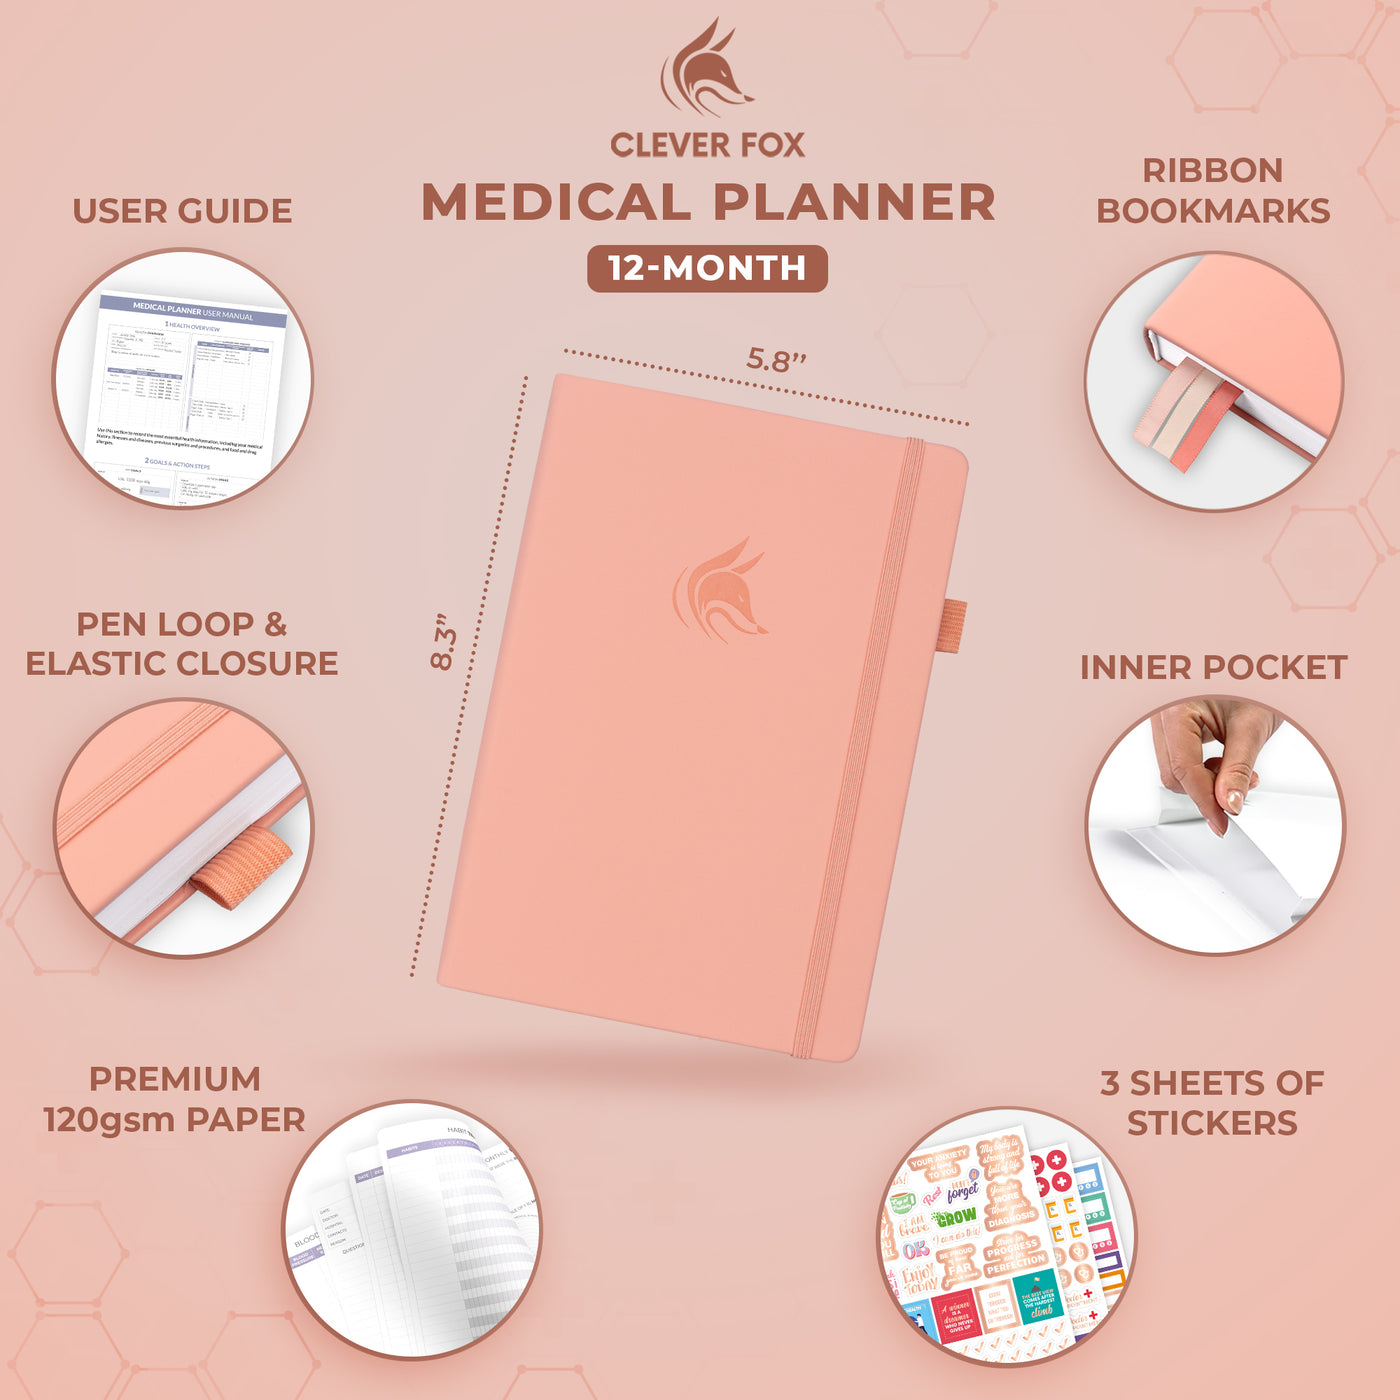 Medical Planner 12-Month A5